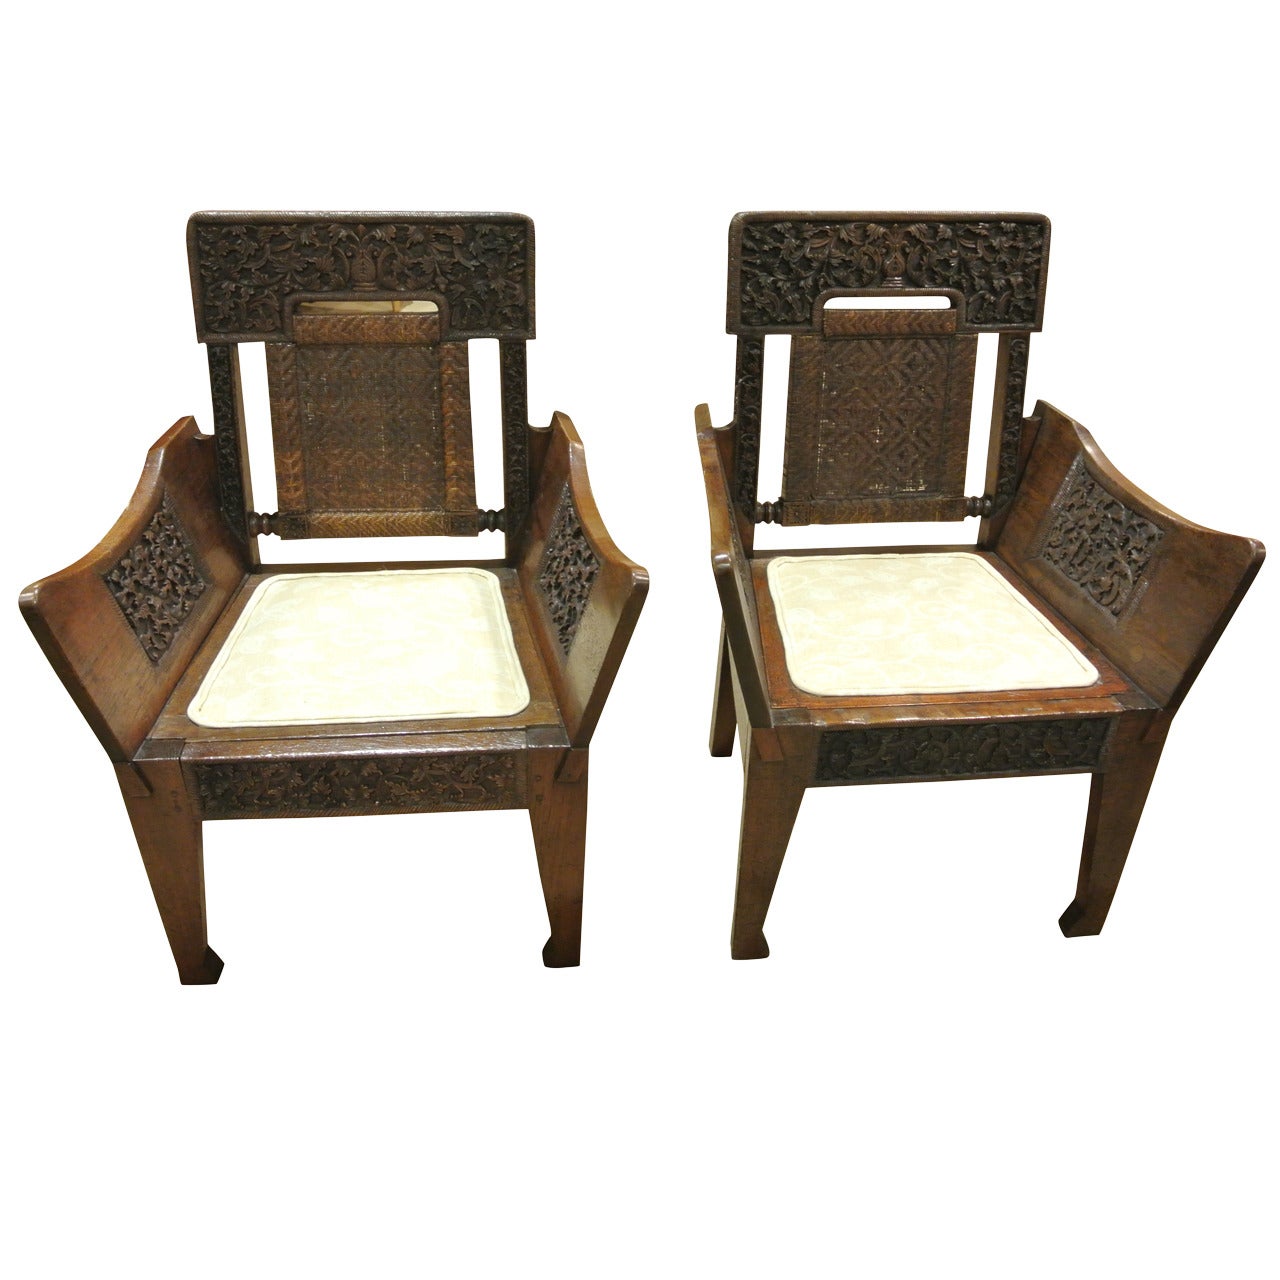 Pair of 19th Century Anglo-Indian Chairs